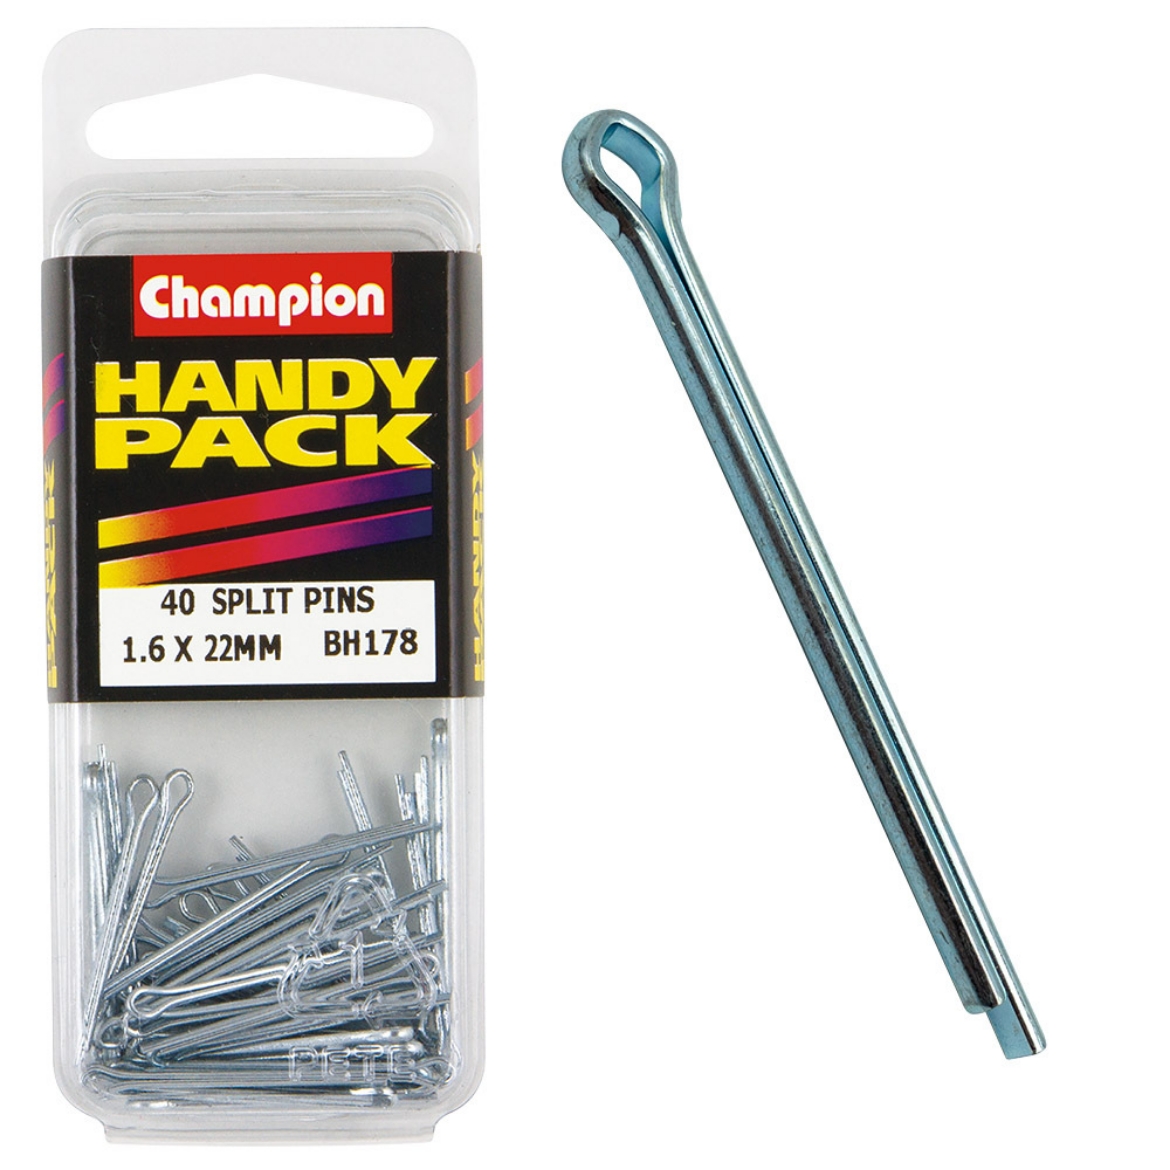 Picture of Handy Pk Split Pins 1.6 x 22mm CPS (Pkt.40)